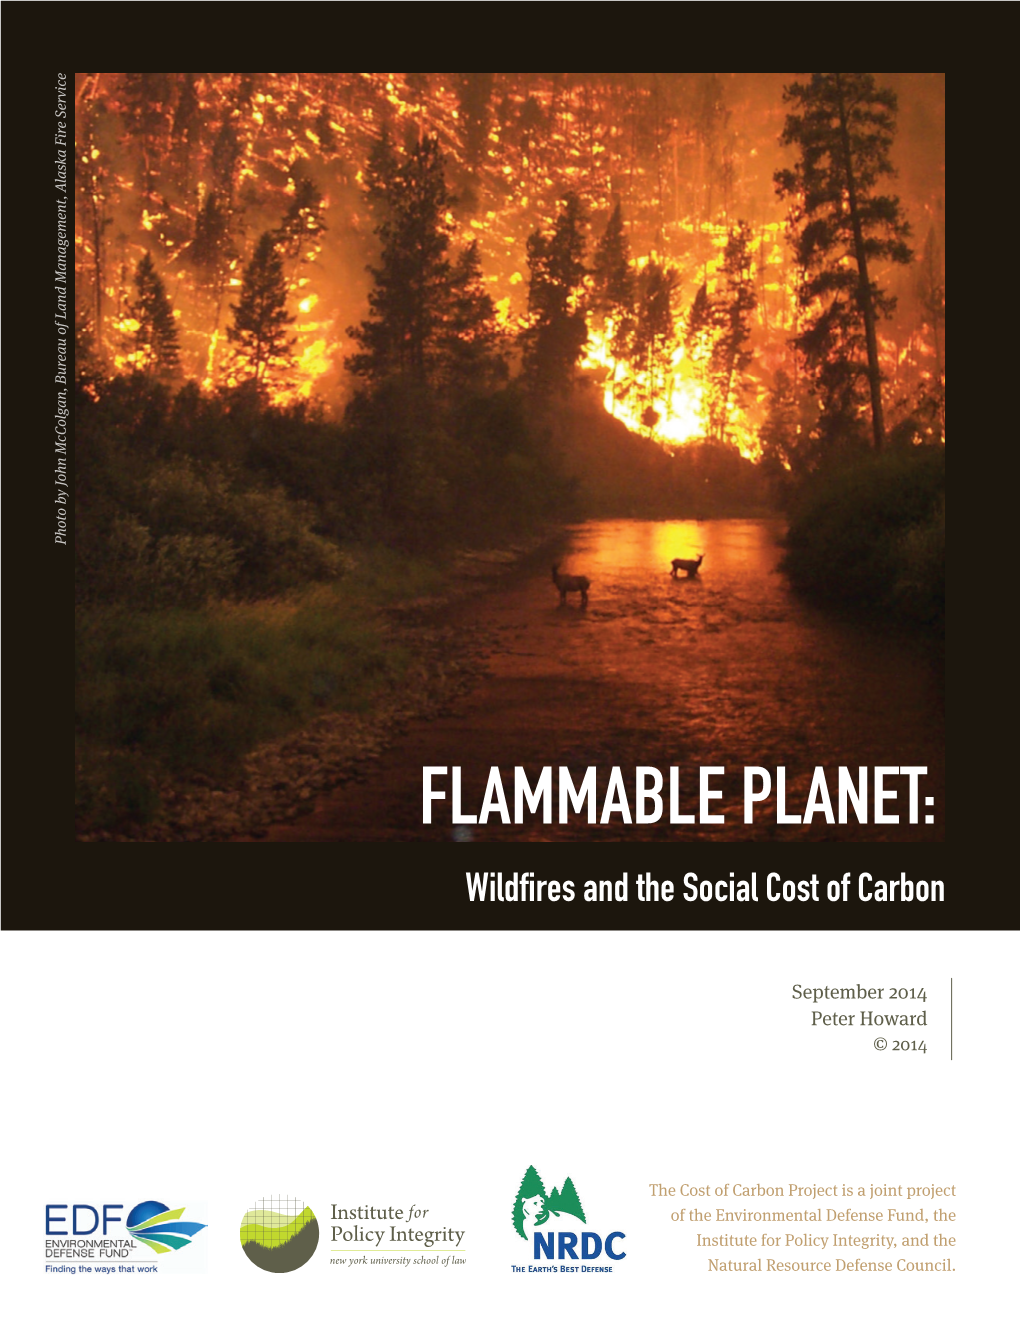 FLAMMABLE PLANET: Wildfires and the Social Cost of Carbon